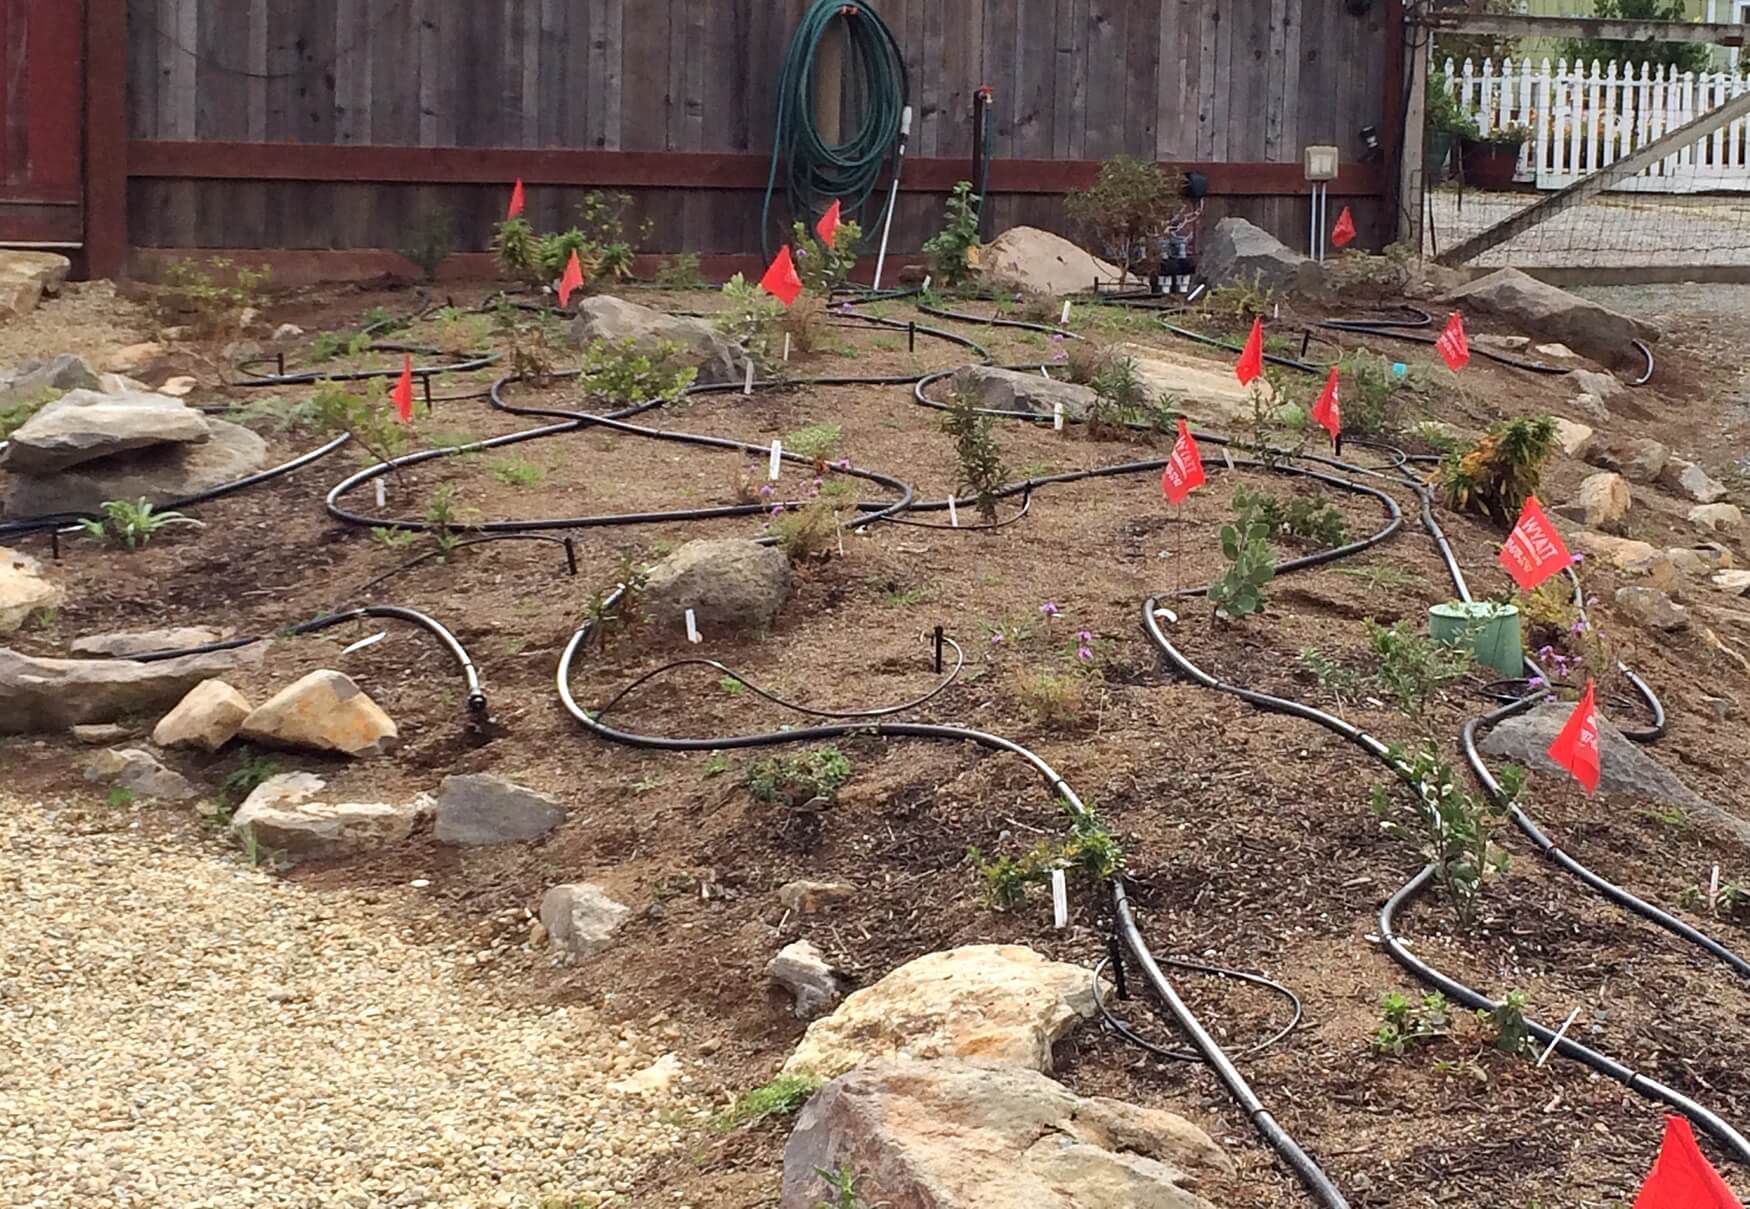 The manzanita habitat berm at our new growing grounds has a main central water line that will provide irrigation for the shrubs until they are established and then will get shut off. The two outer lines will remain to water other plants in the berm. Photo: Laura Lovett